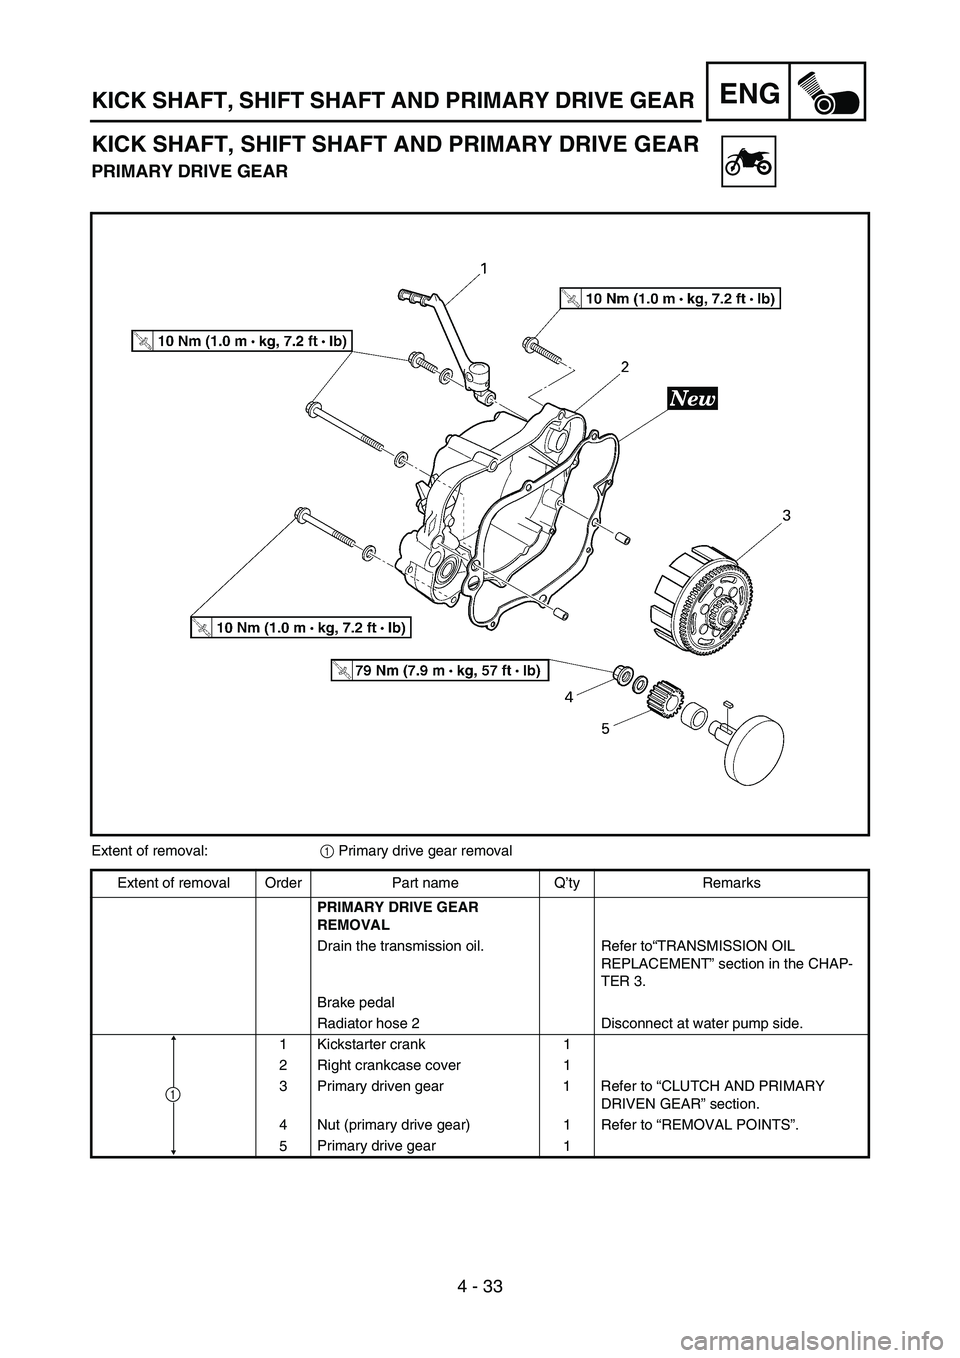 YAMAHA YZ85 2006  Notices Demploi (in French) 4 - 33
ENGKICK SHAFT, SHIFT SHAFT AND PRIMARY DRIVE GEAR
KICK SHAFT, SHIFT SHAFT AND PRIMARY DRIVE GEAR
PRIMARY DRIVE GEAR
5PAR0008
Extent of removal:
1 Primary drive gear removal 
Extent of removal O